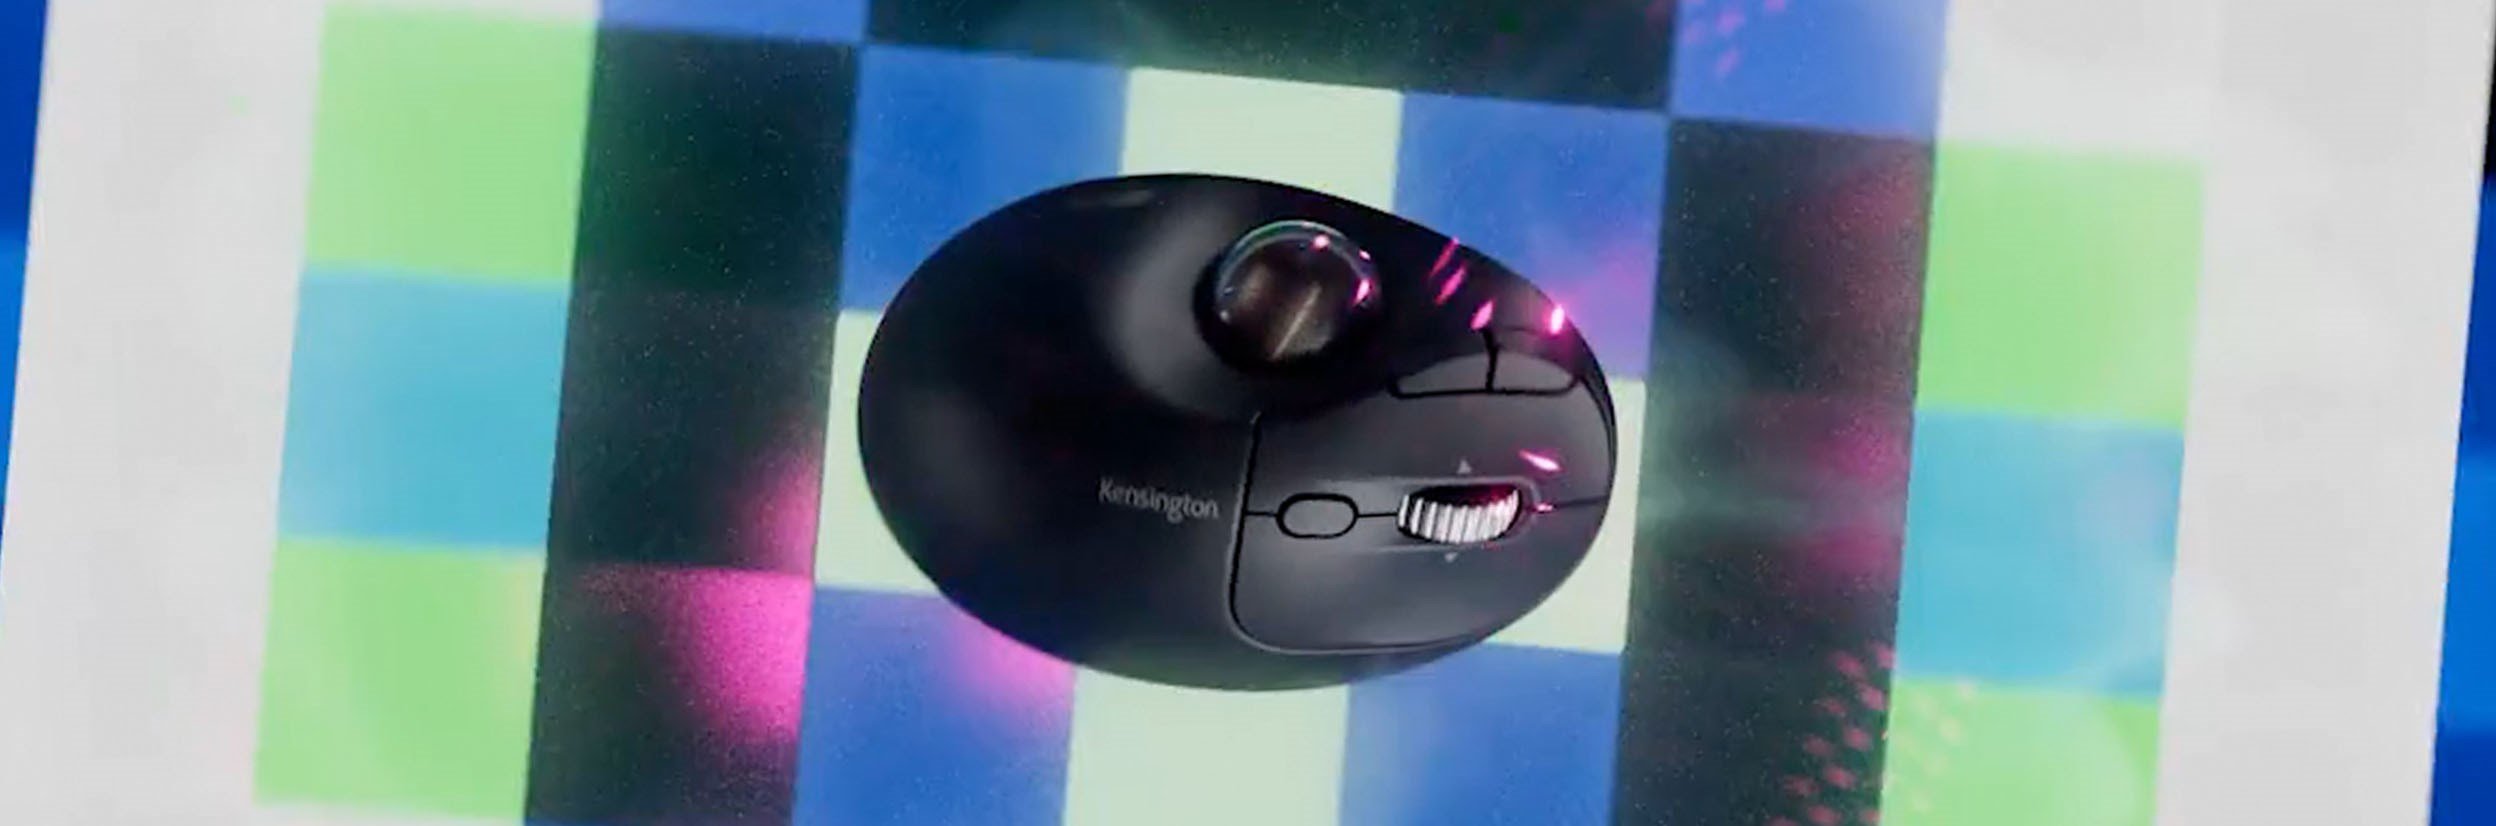 Top view of a trackball.